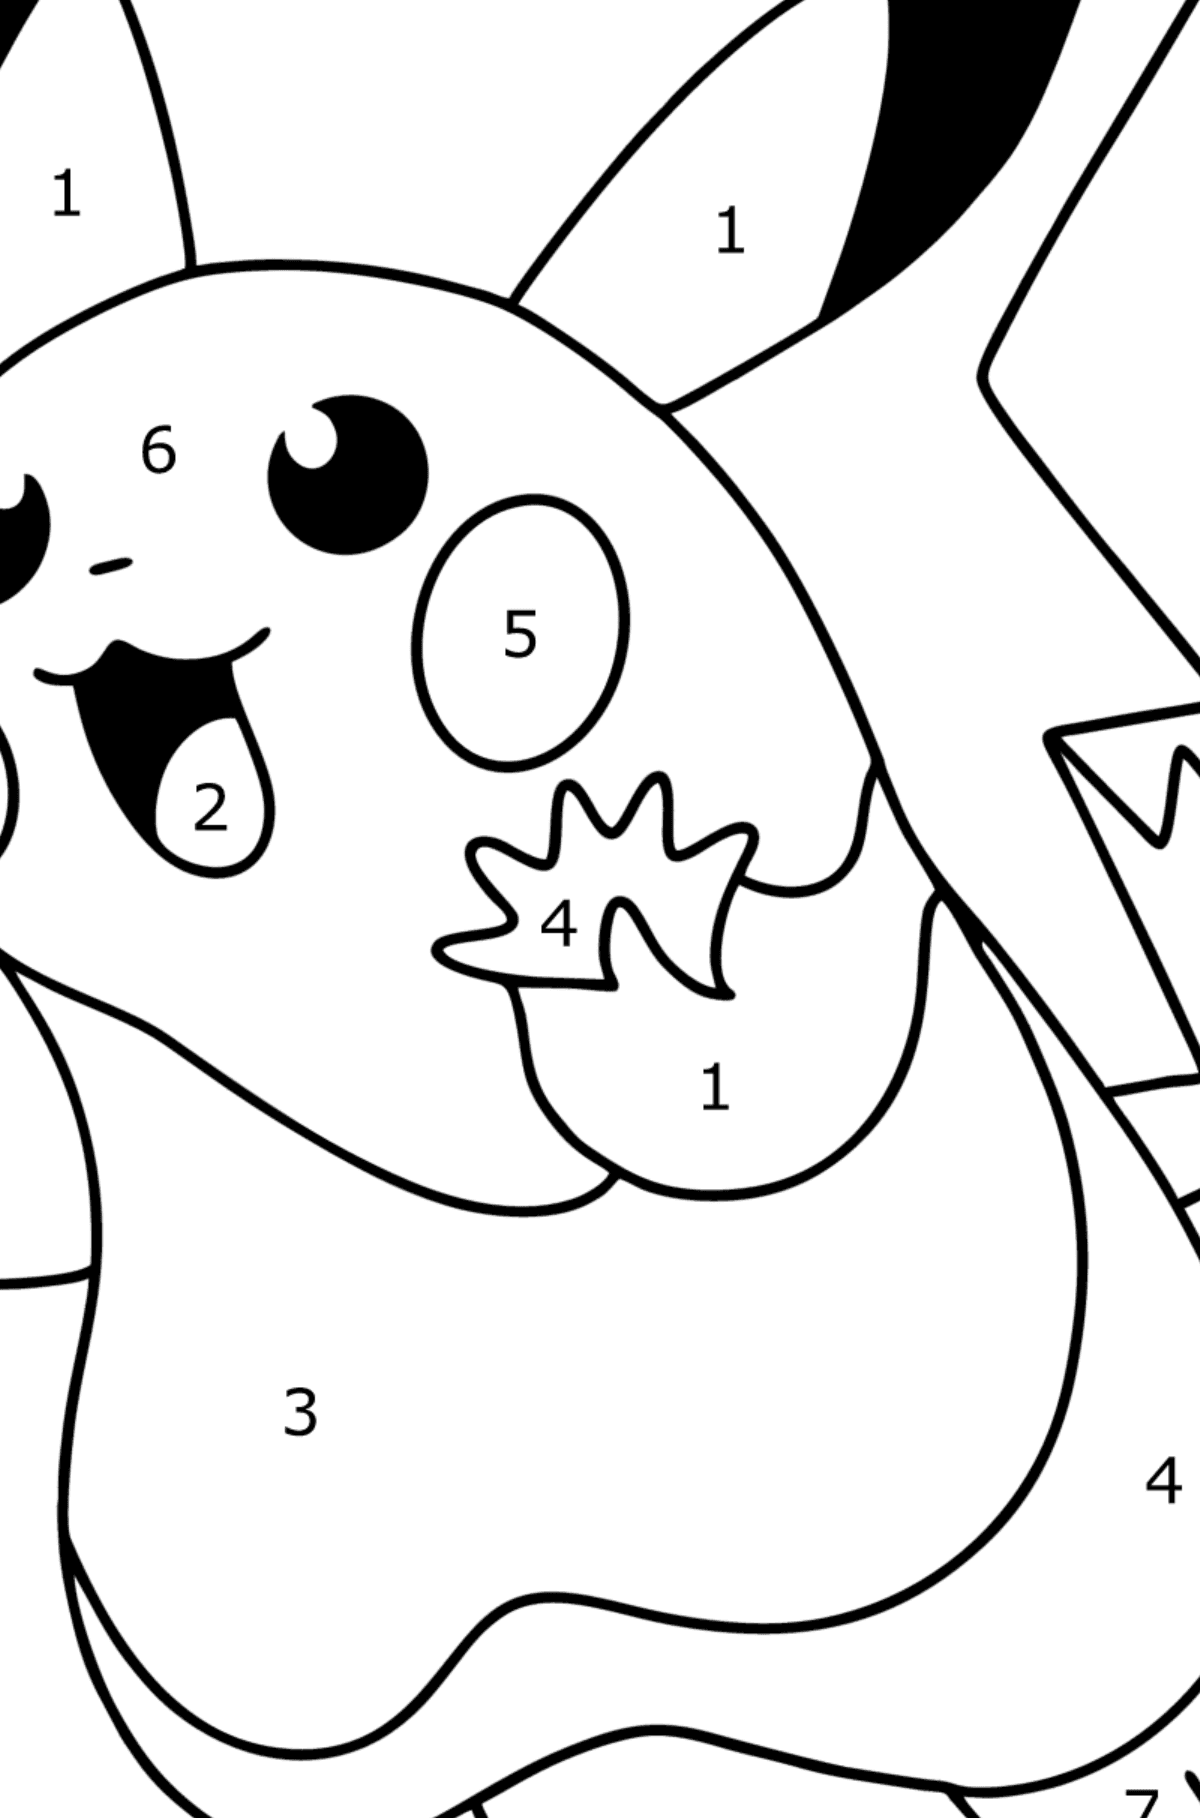 Coloring page Pokémon Go Picachu - Coloring by Numbers for Kids